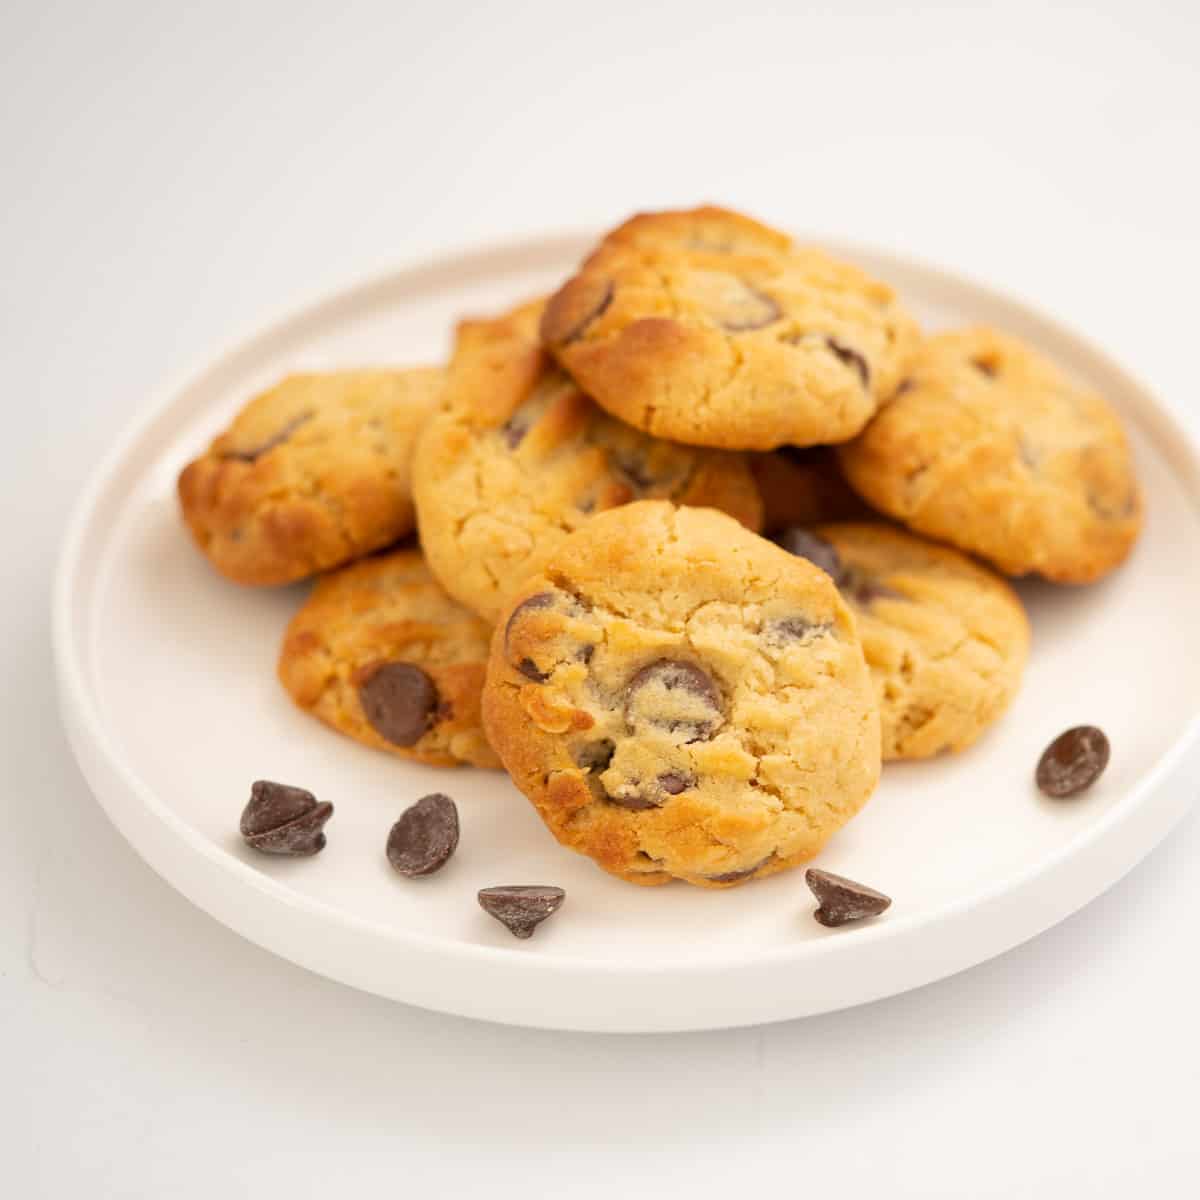 A plate of chocolate chip cookies.